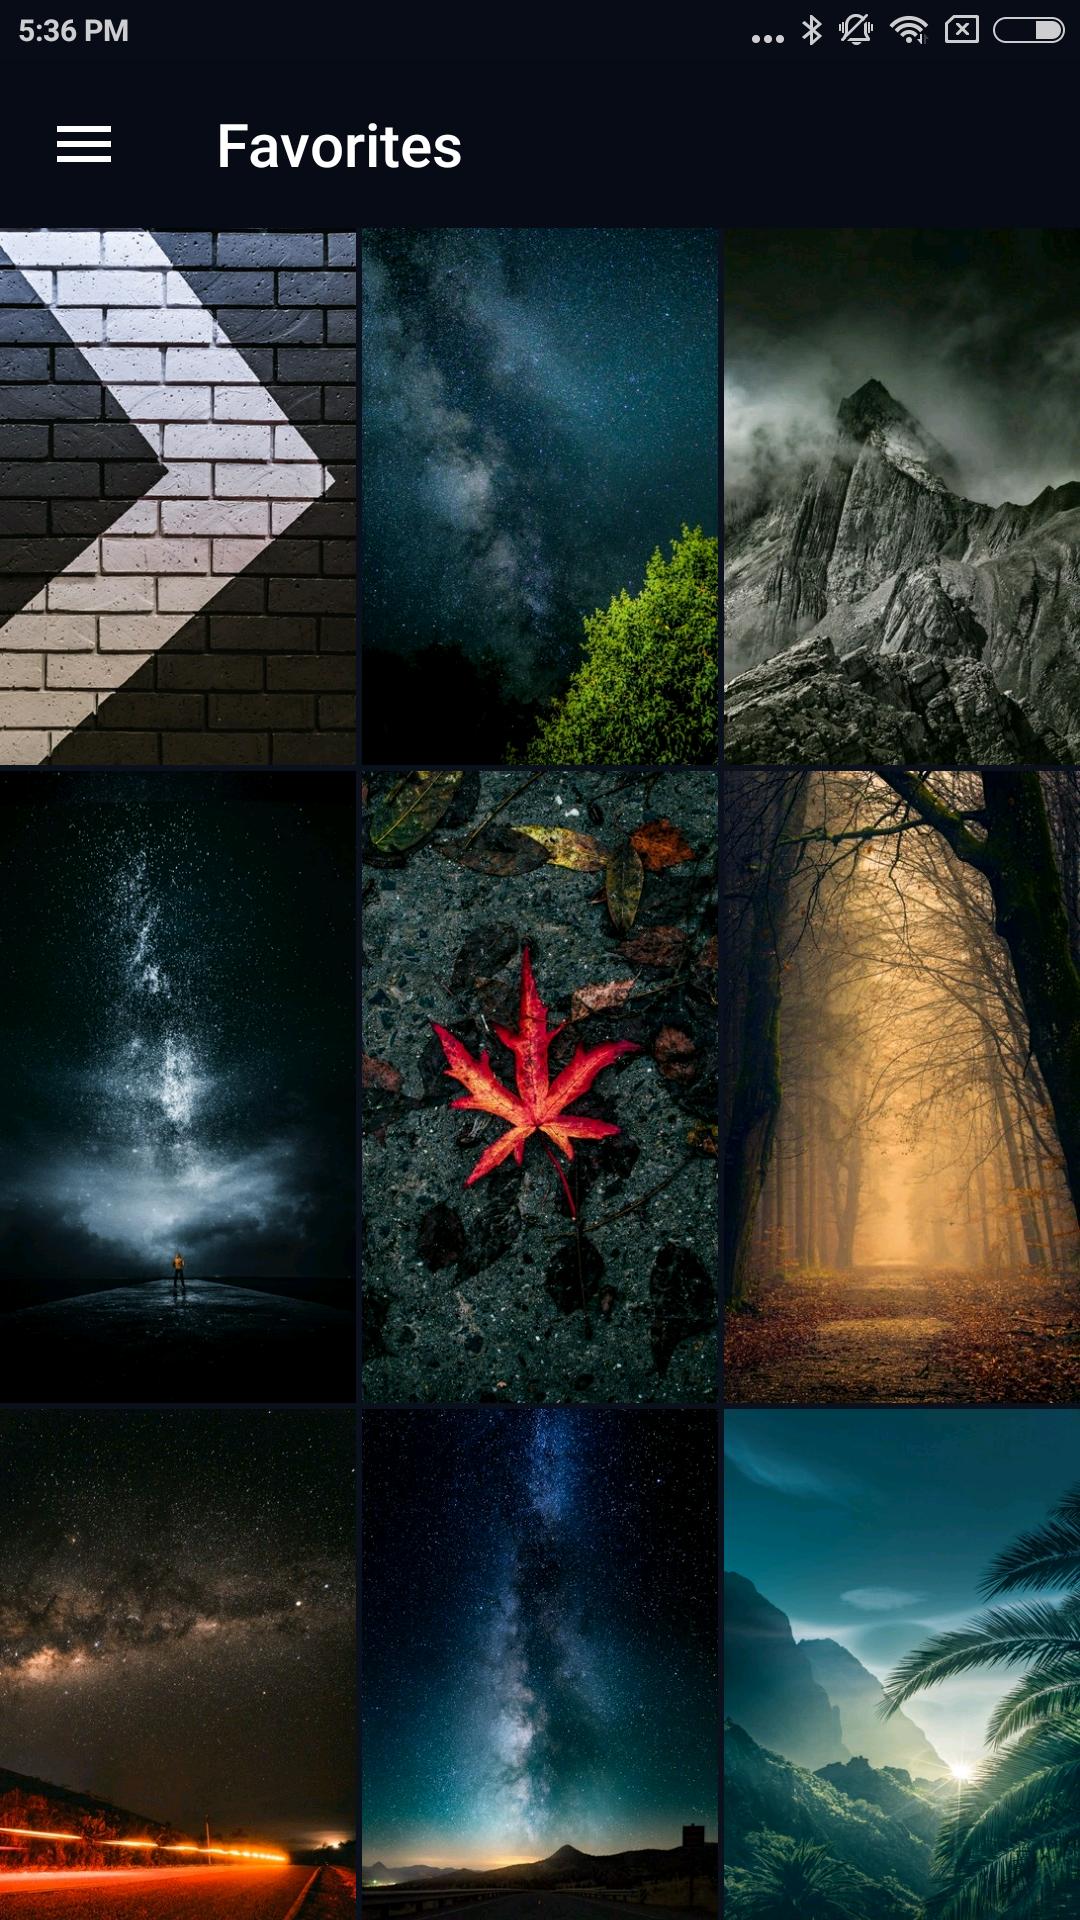 4k wallpapers for android,sky,graphic design,world,screenshot,games